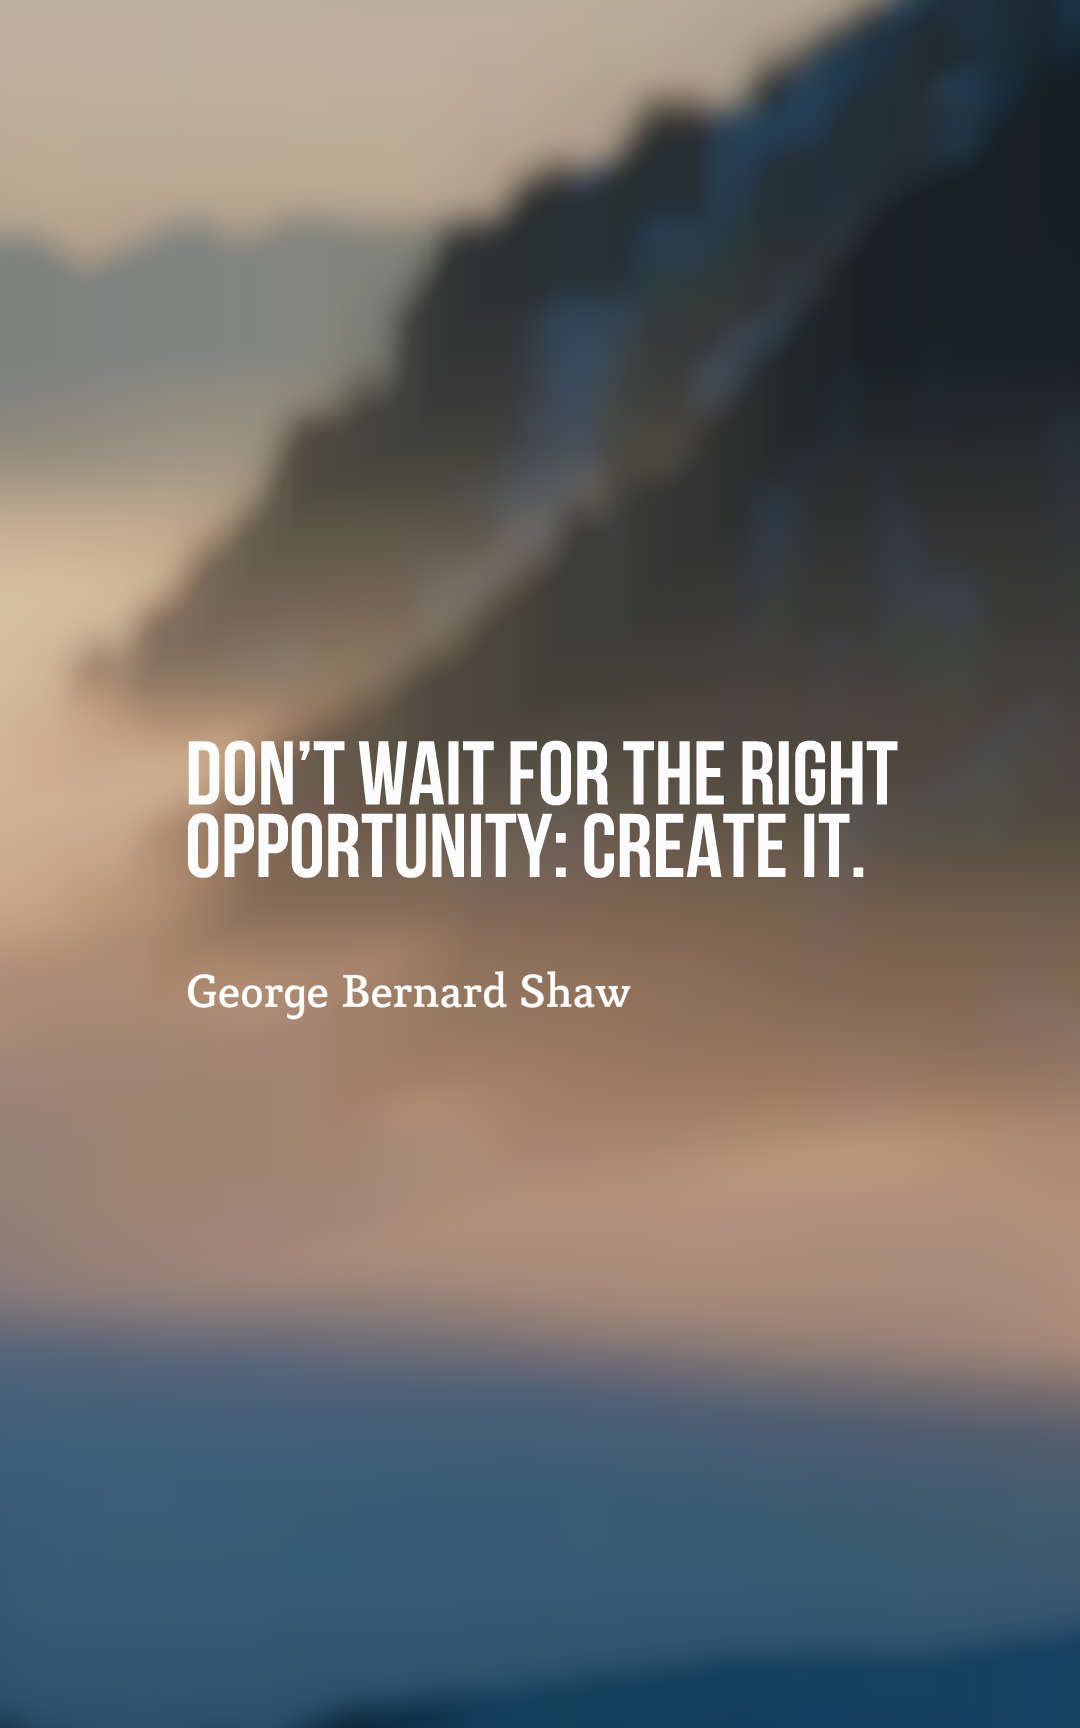 Don’t wait for the right opportunity create it.